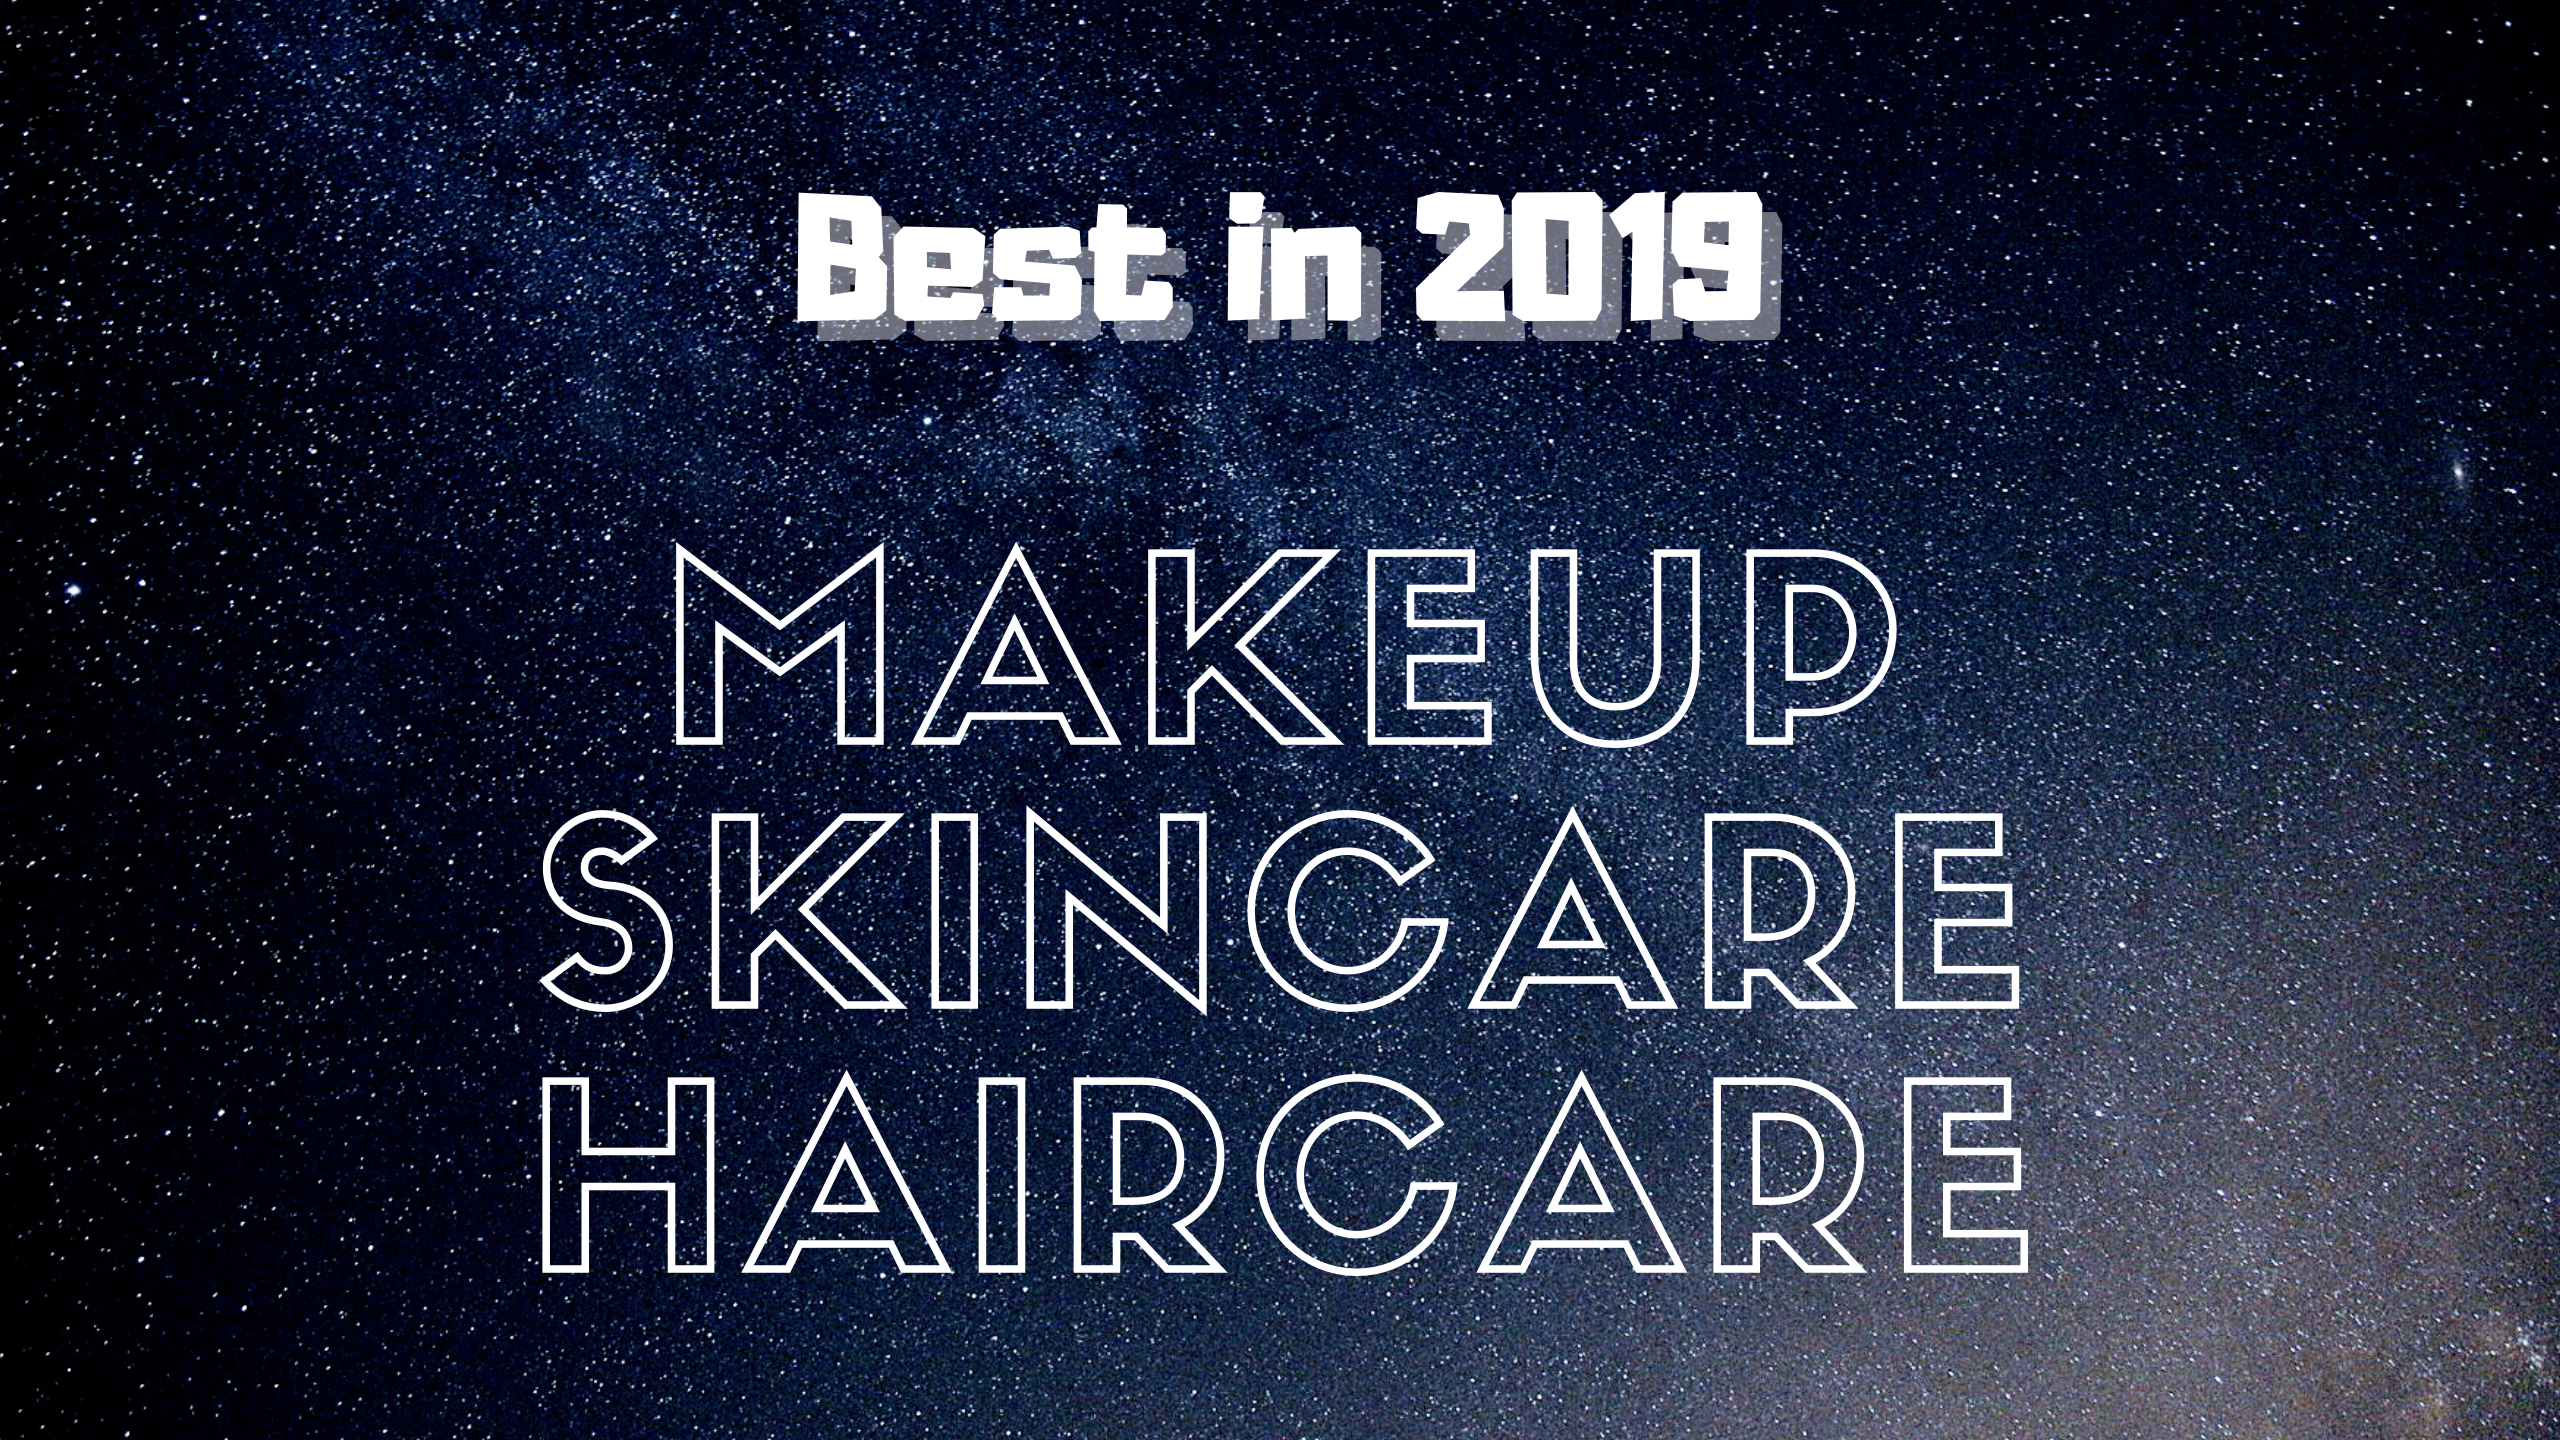 Best in beauty awards: prodotti makeup,skincare,haircare top del 2019